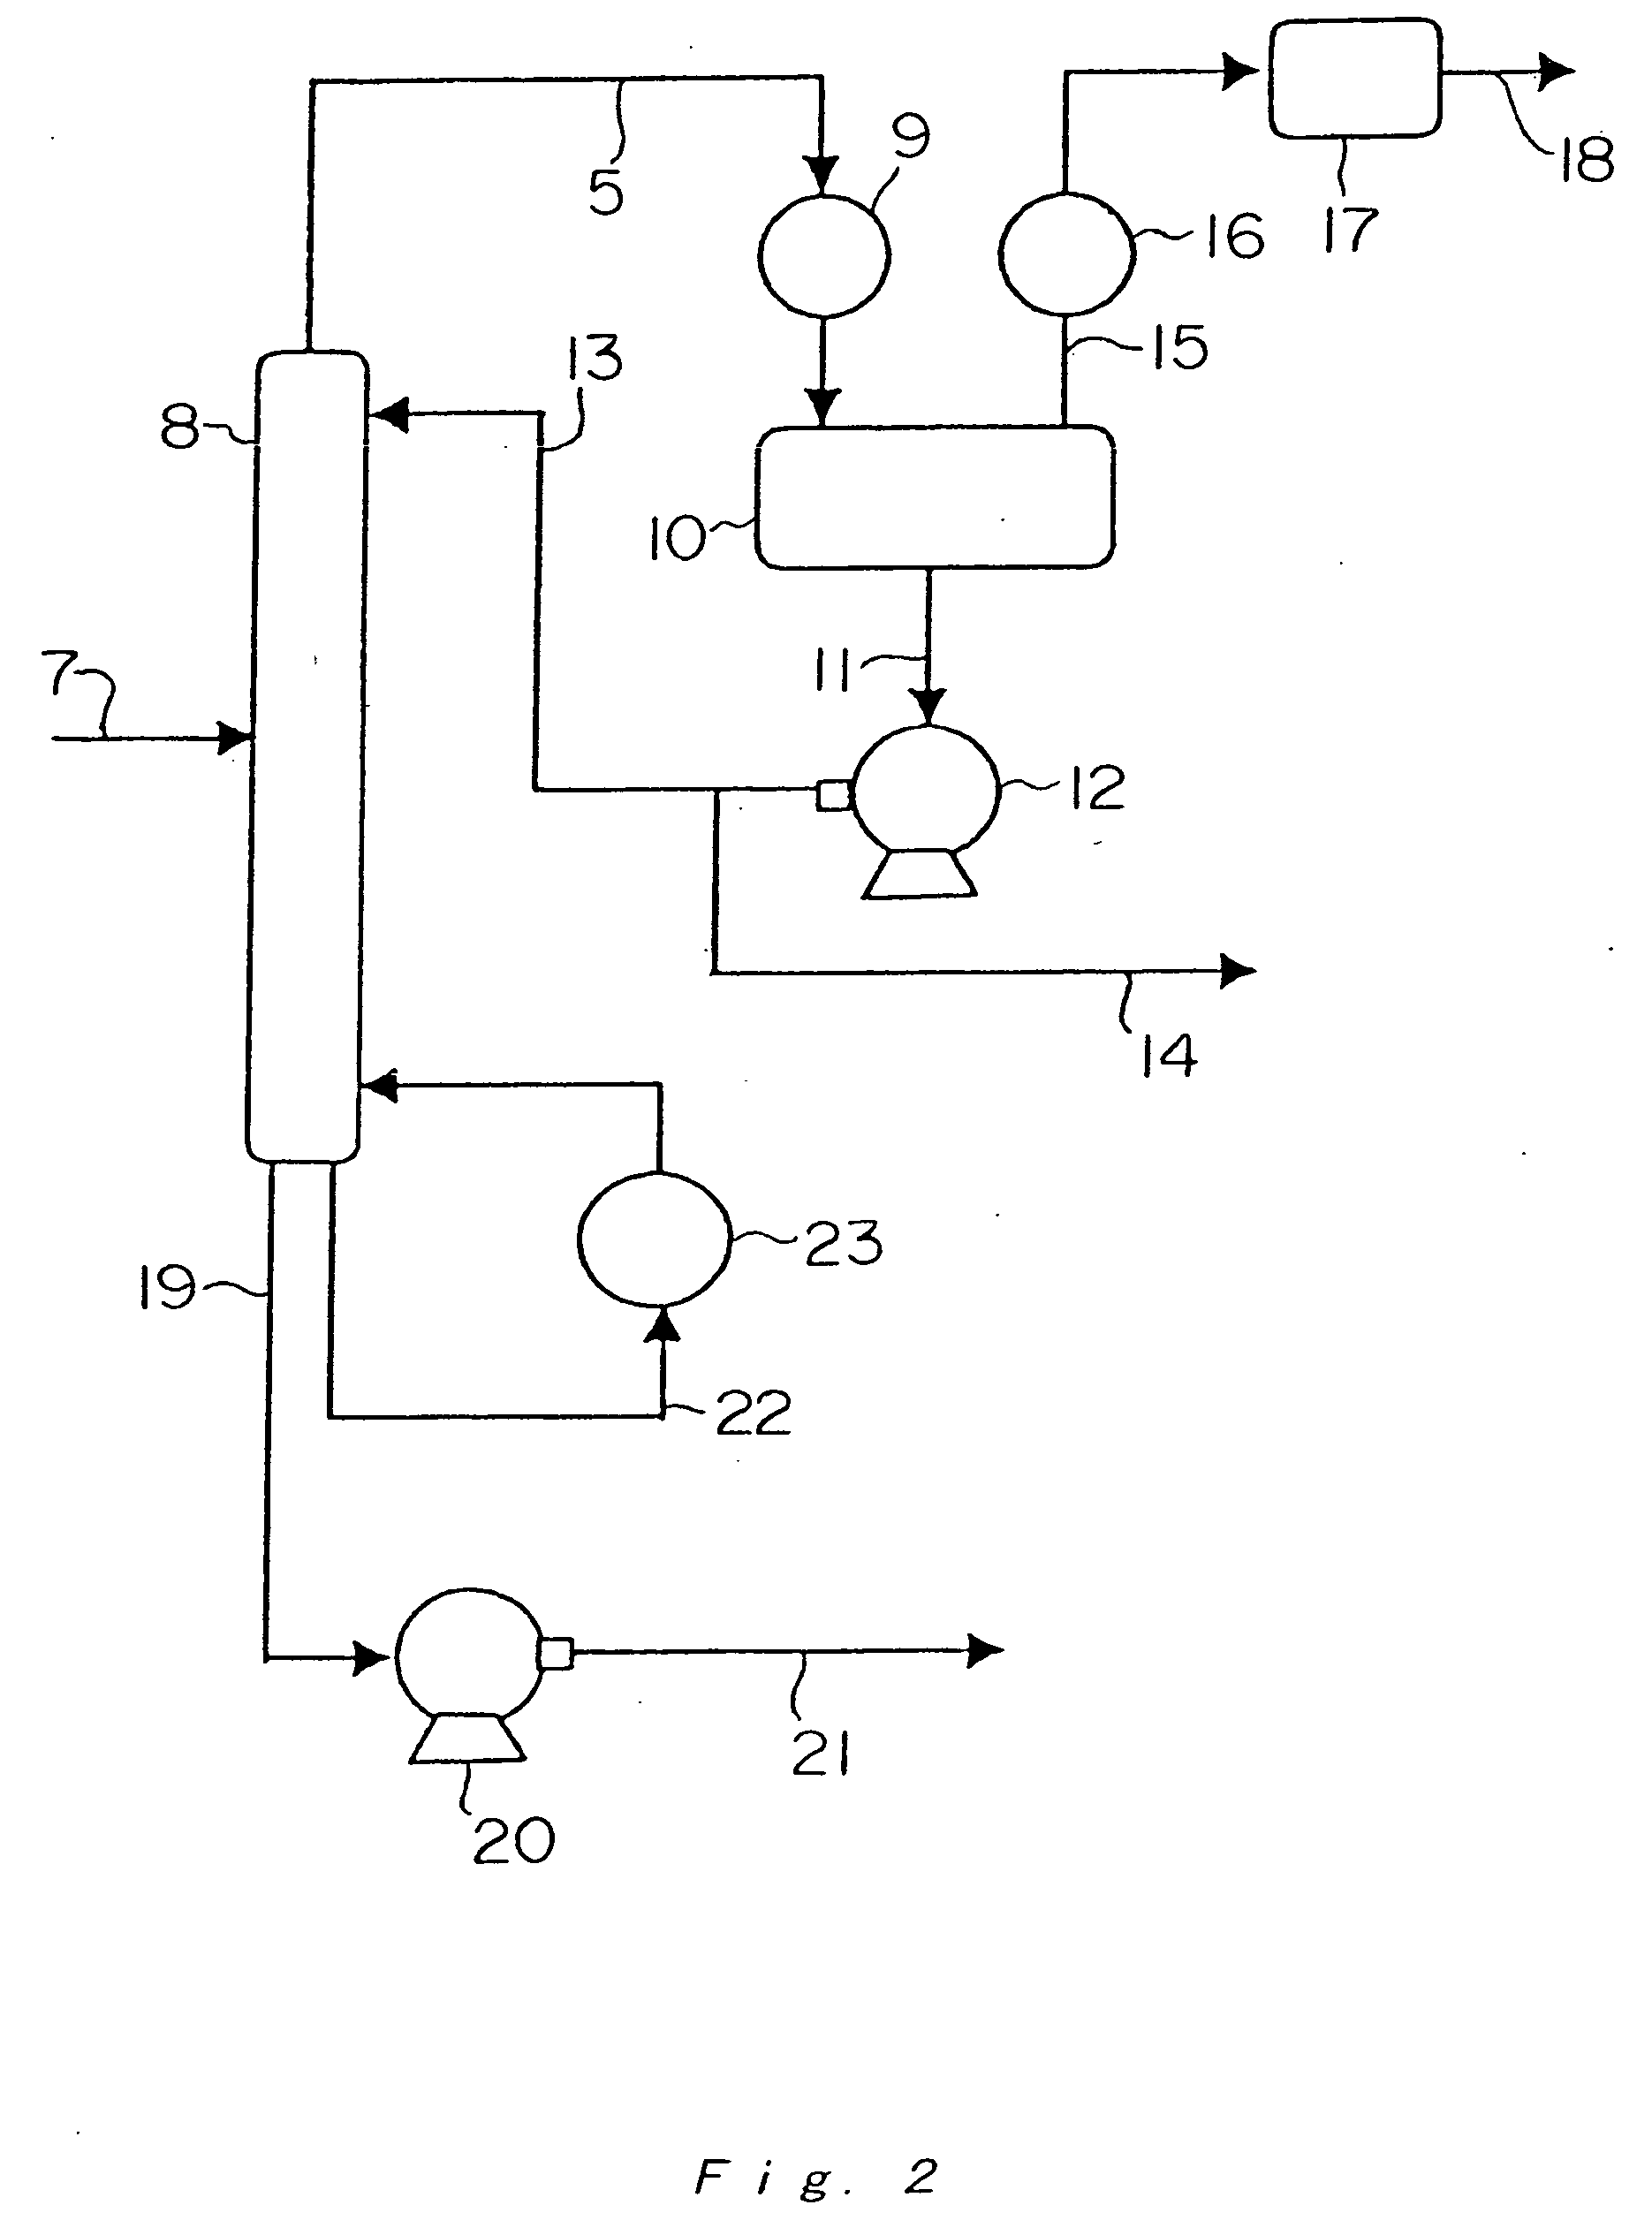 Apparatus and method for handling easily polymerizable substance, apparatus for extracting liquid from apparatus under reduced pressure, and process for producing easily polymerizable substance